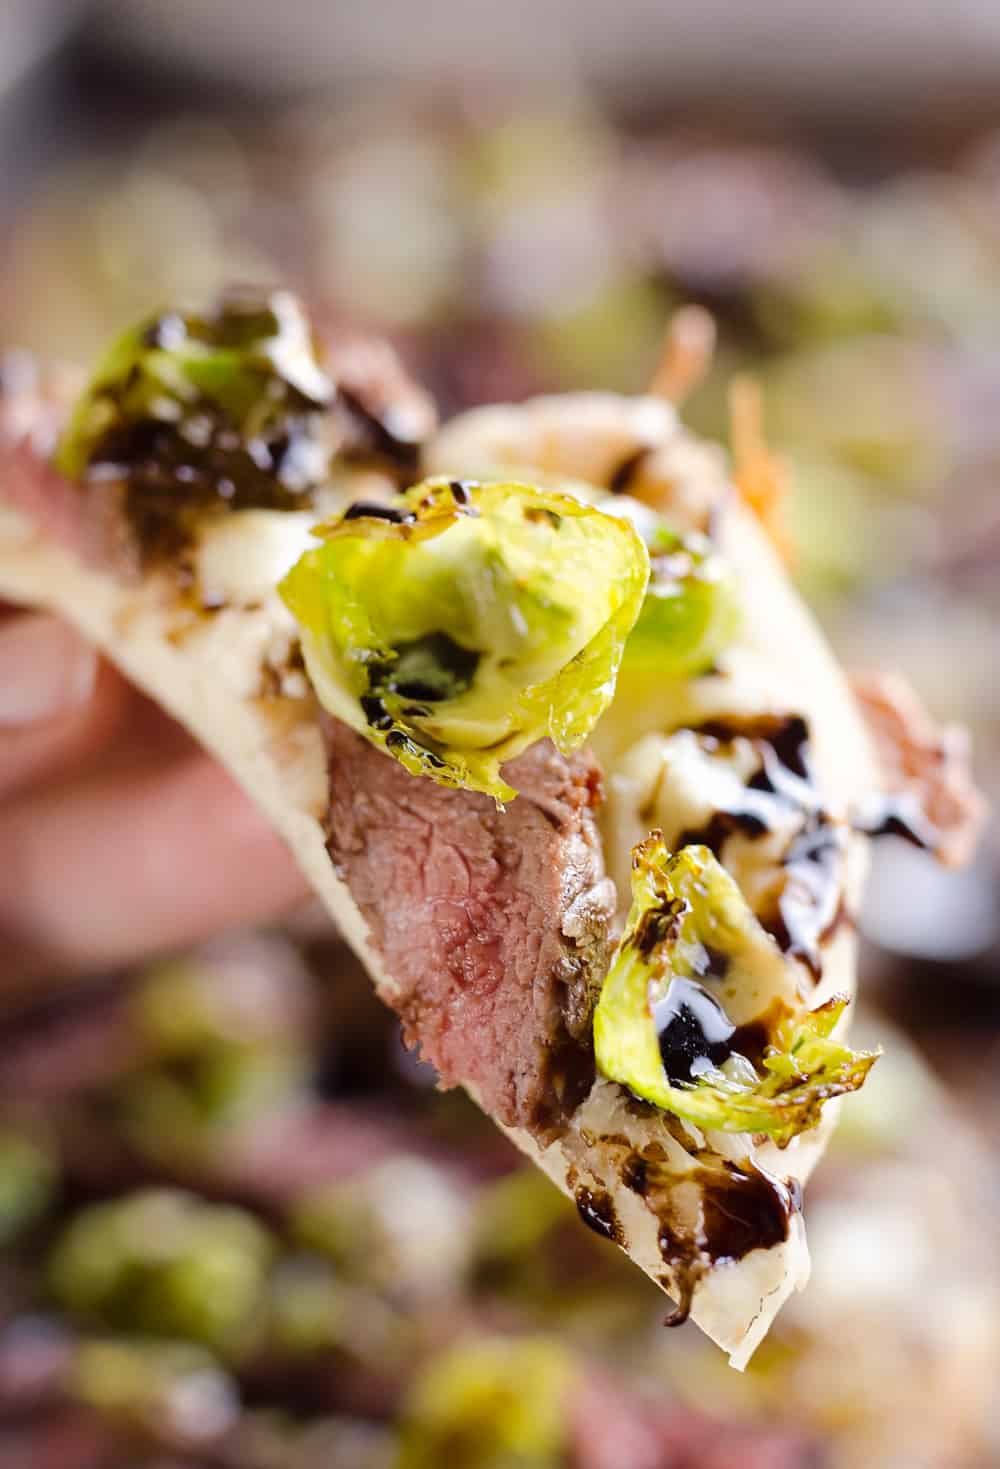 Steak, Goat Cheese & Roasted Brussels Sprout Flatbread is a hearty dinner idea bursting with bold flavors. A chewy naan bread is topped with goat cheese, grilled steak, roasted brussels sprout leaves and a balsamic glaze for a delicious and unique recipe you will make again and again!